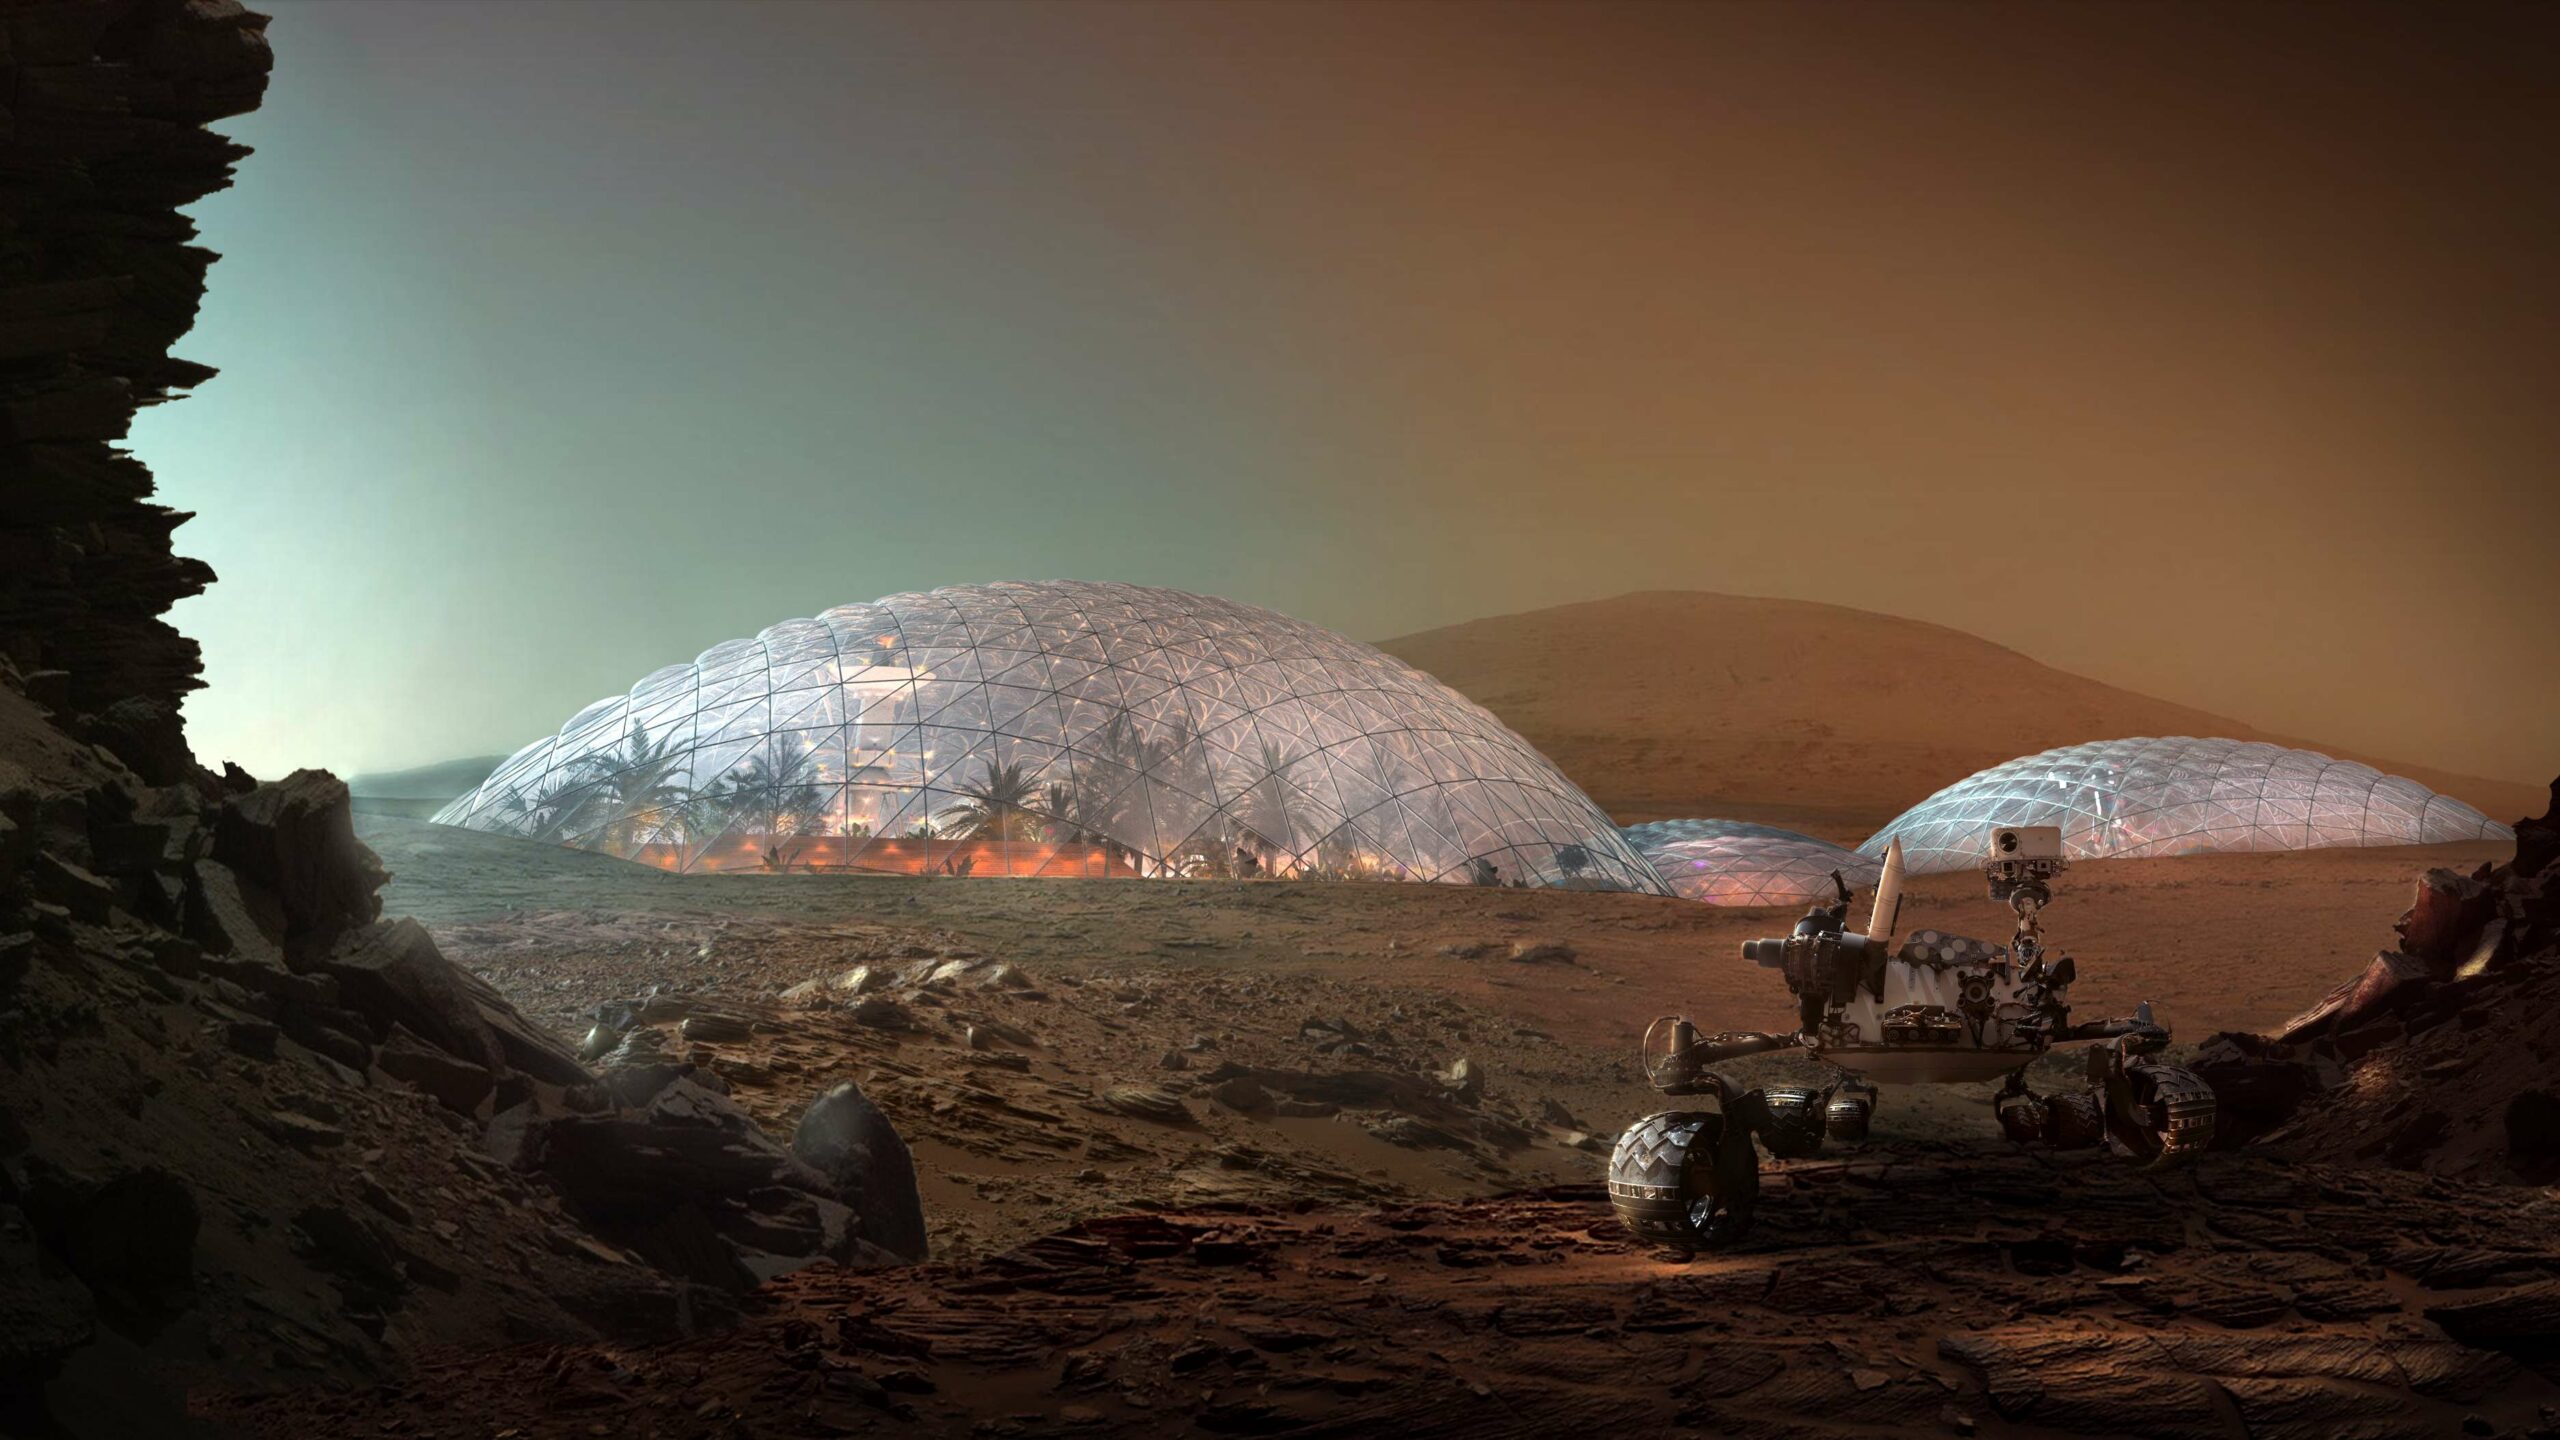 Check out the United Arab Emirates’ plans for building a Martian city—right here on Earth